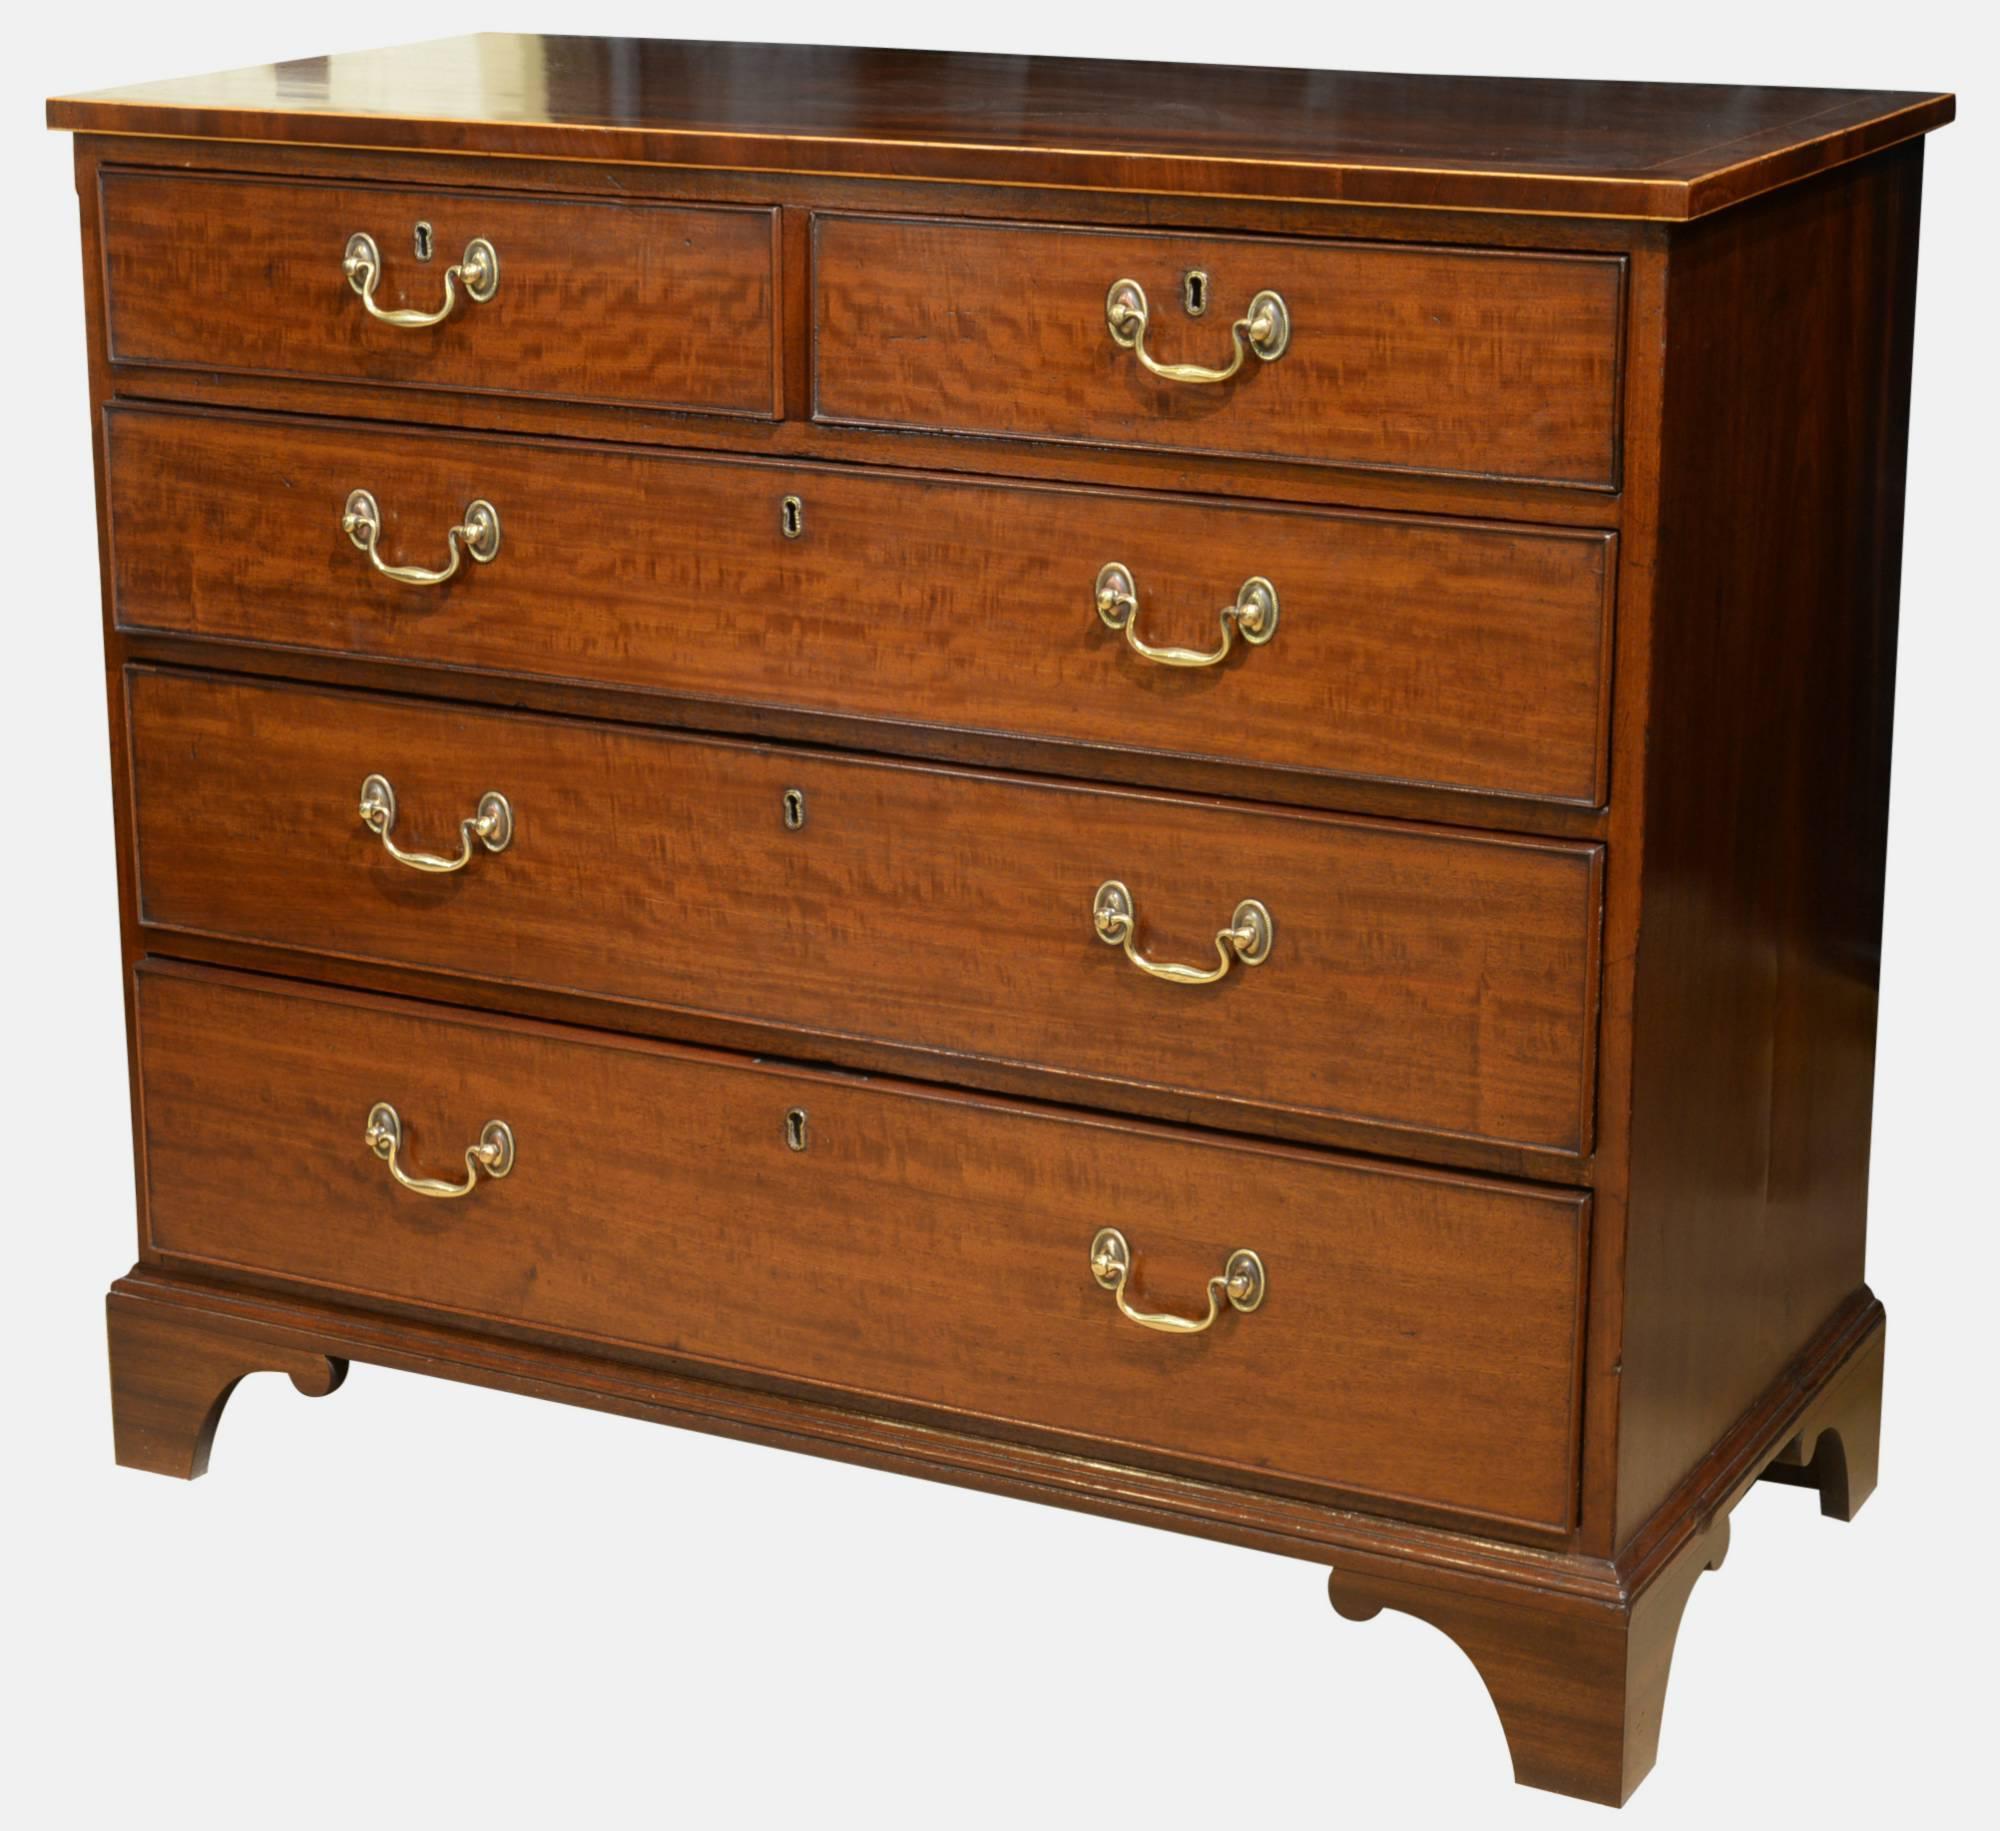 Fine quality mahogany 18th century chest with oak linings and original handles,

circa 1780.